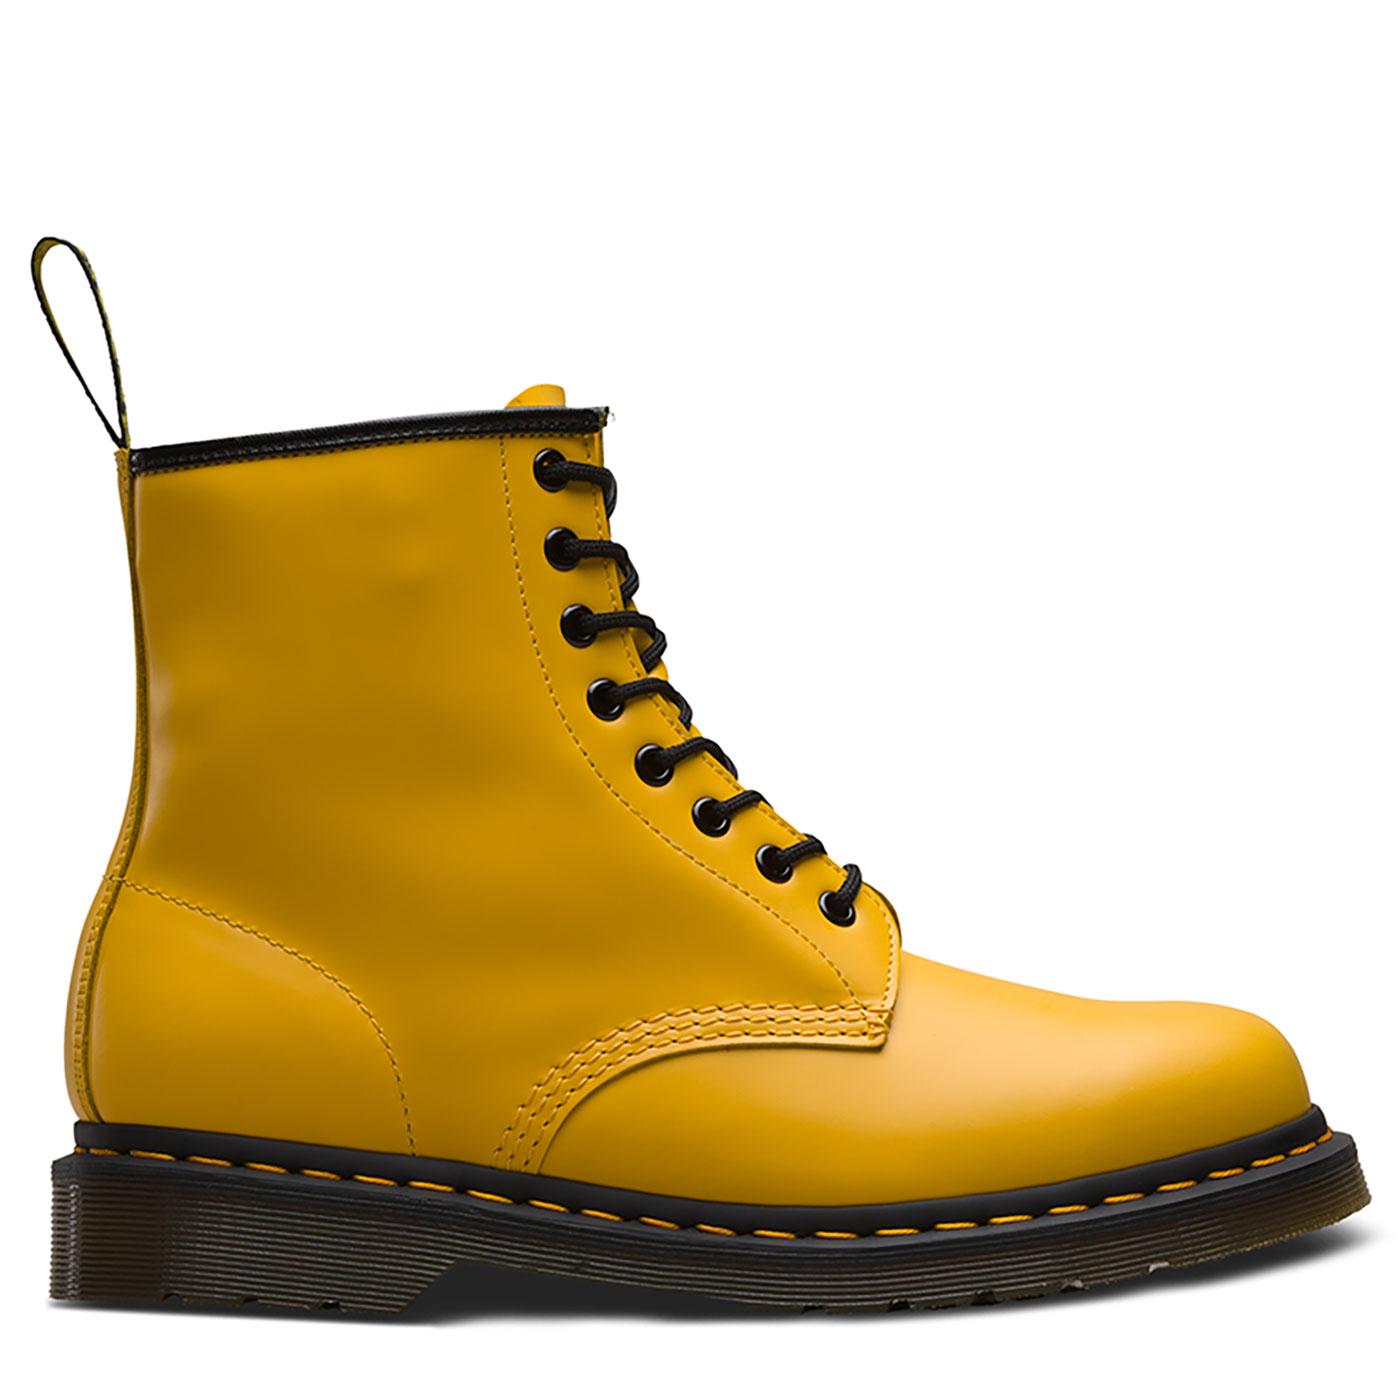 DR MARTENS '1460 Colour Pop' Retro Smooth Boots in Yellow